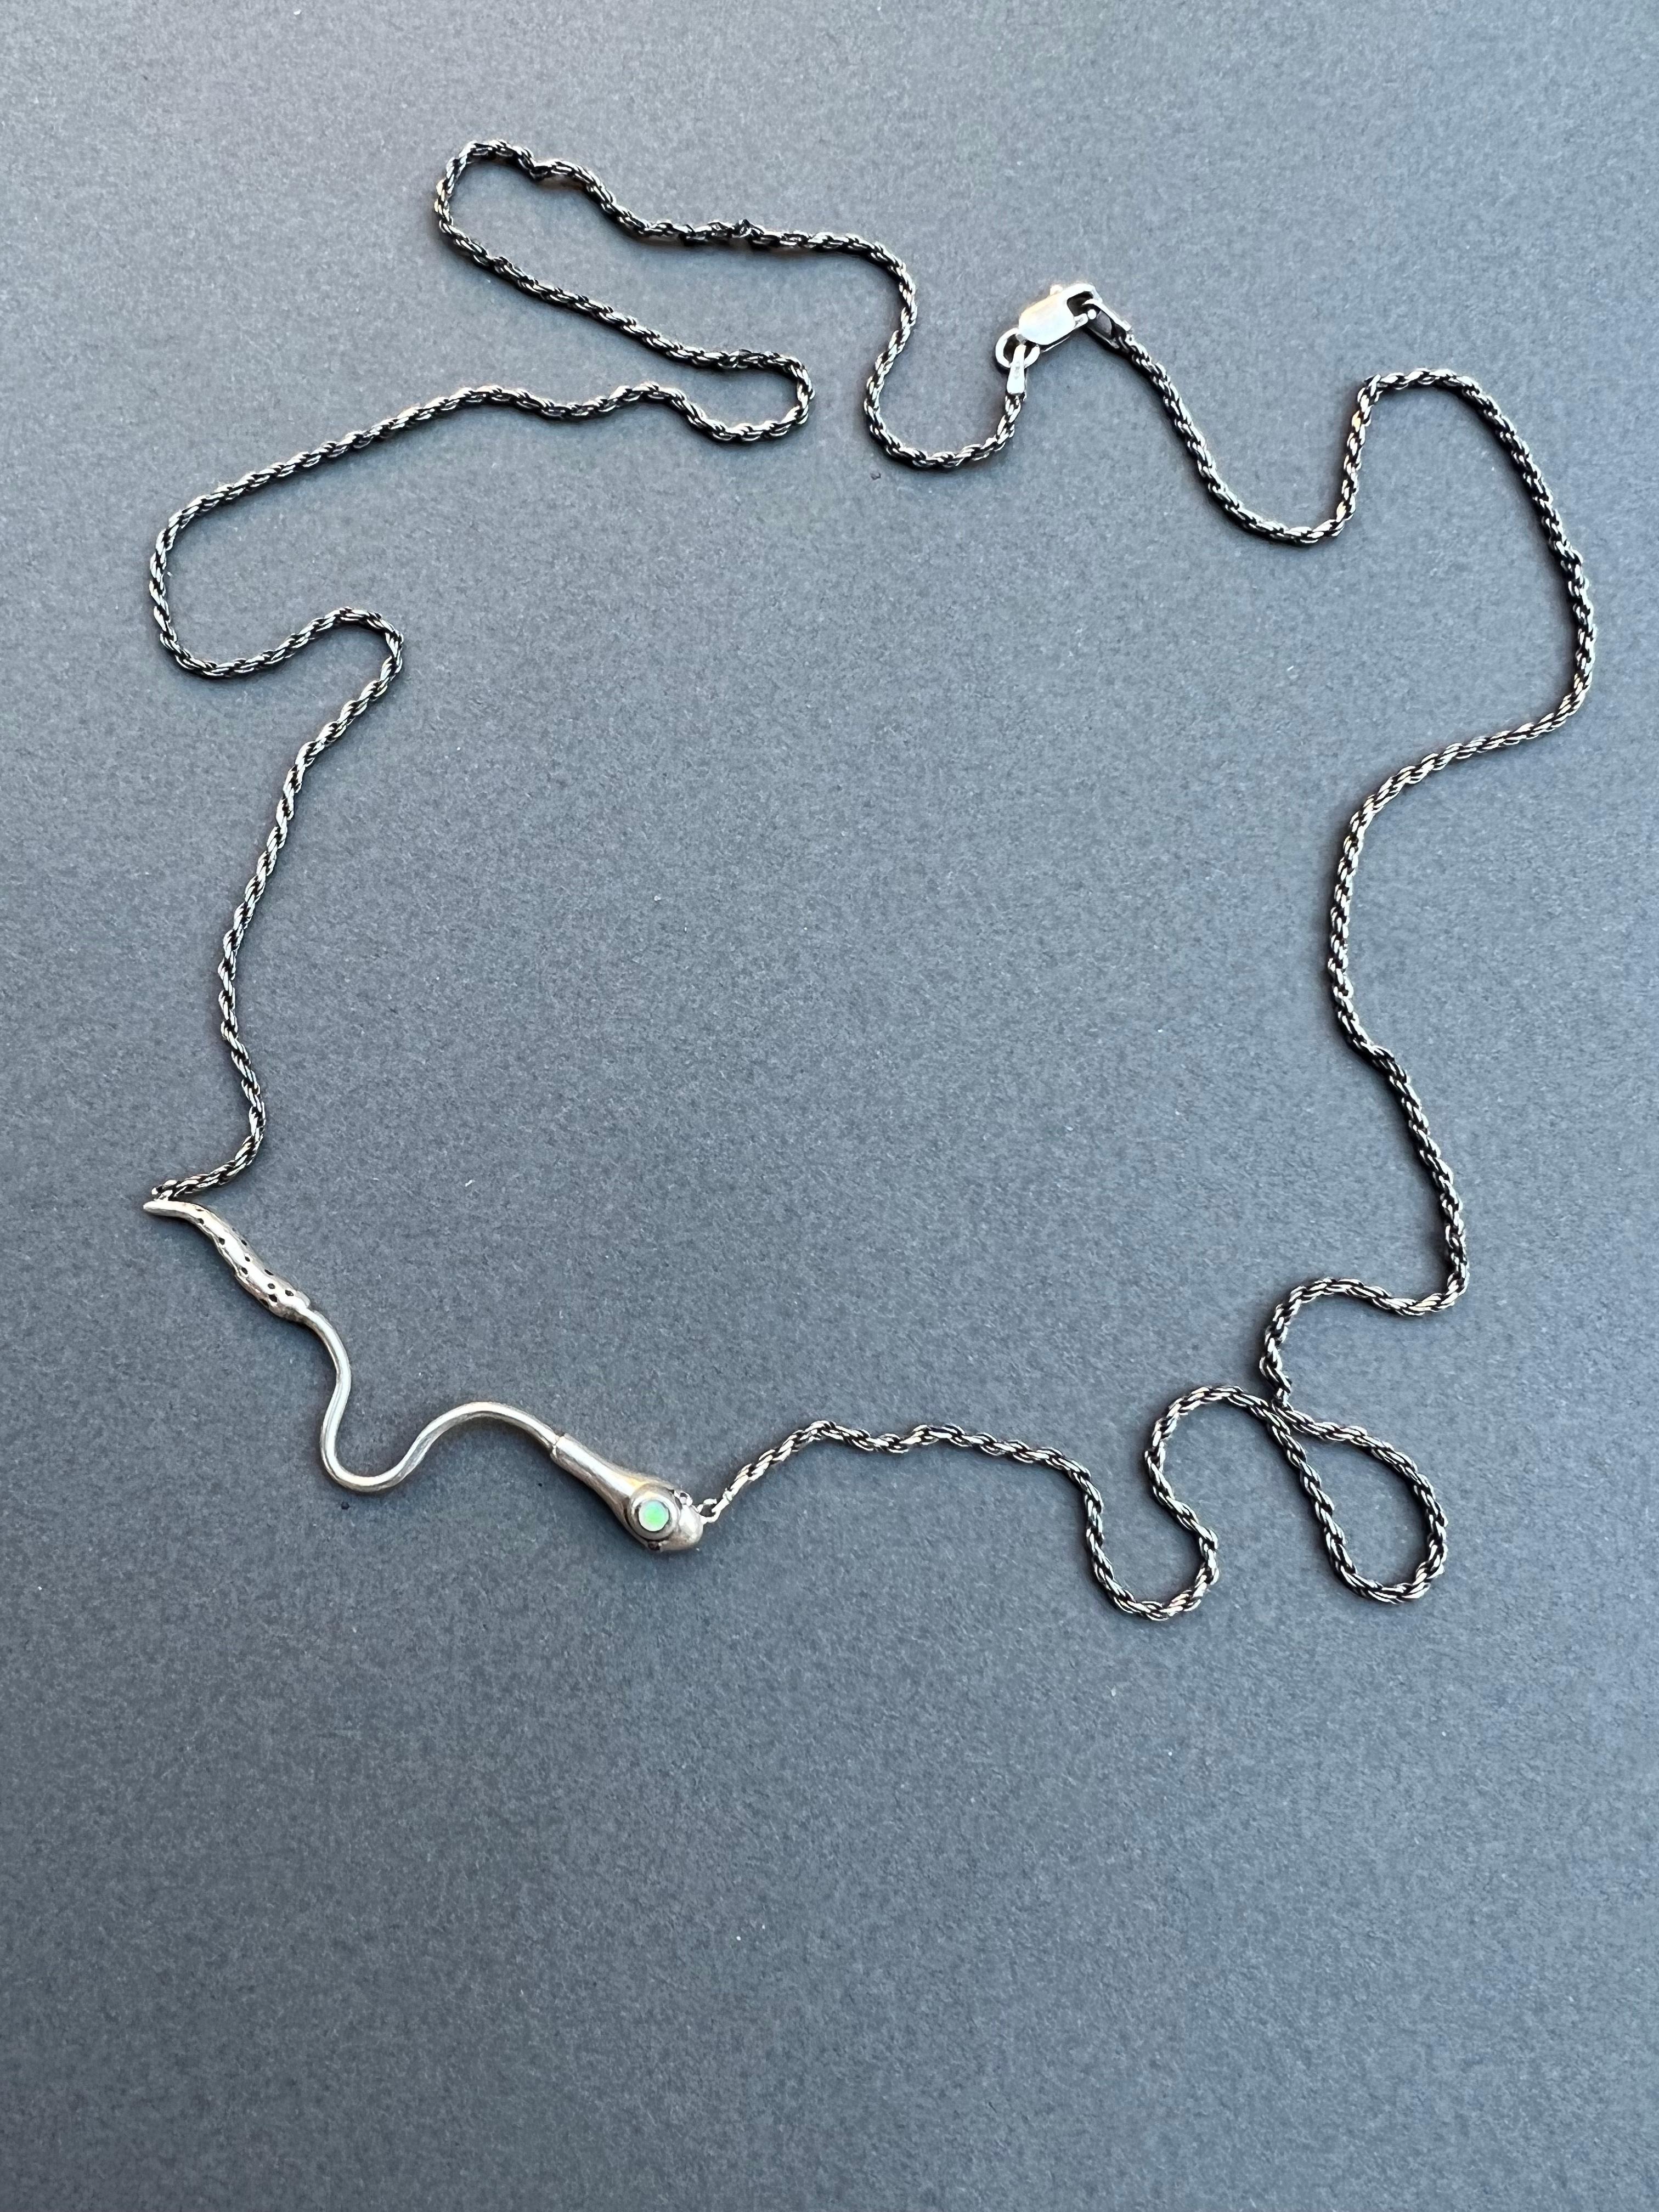 Opal Ruby Snake Necklace Italian Silver Chain J Dauphin For Sale 6